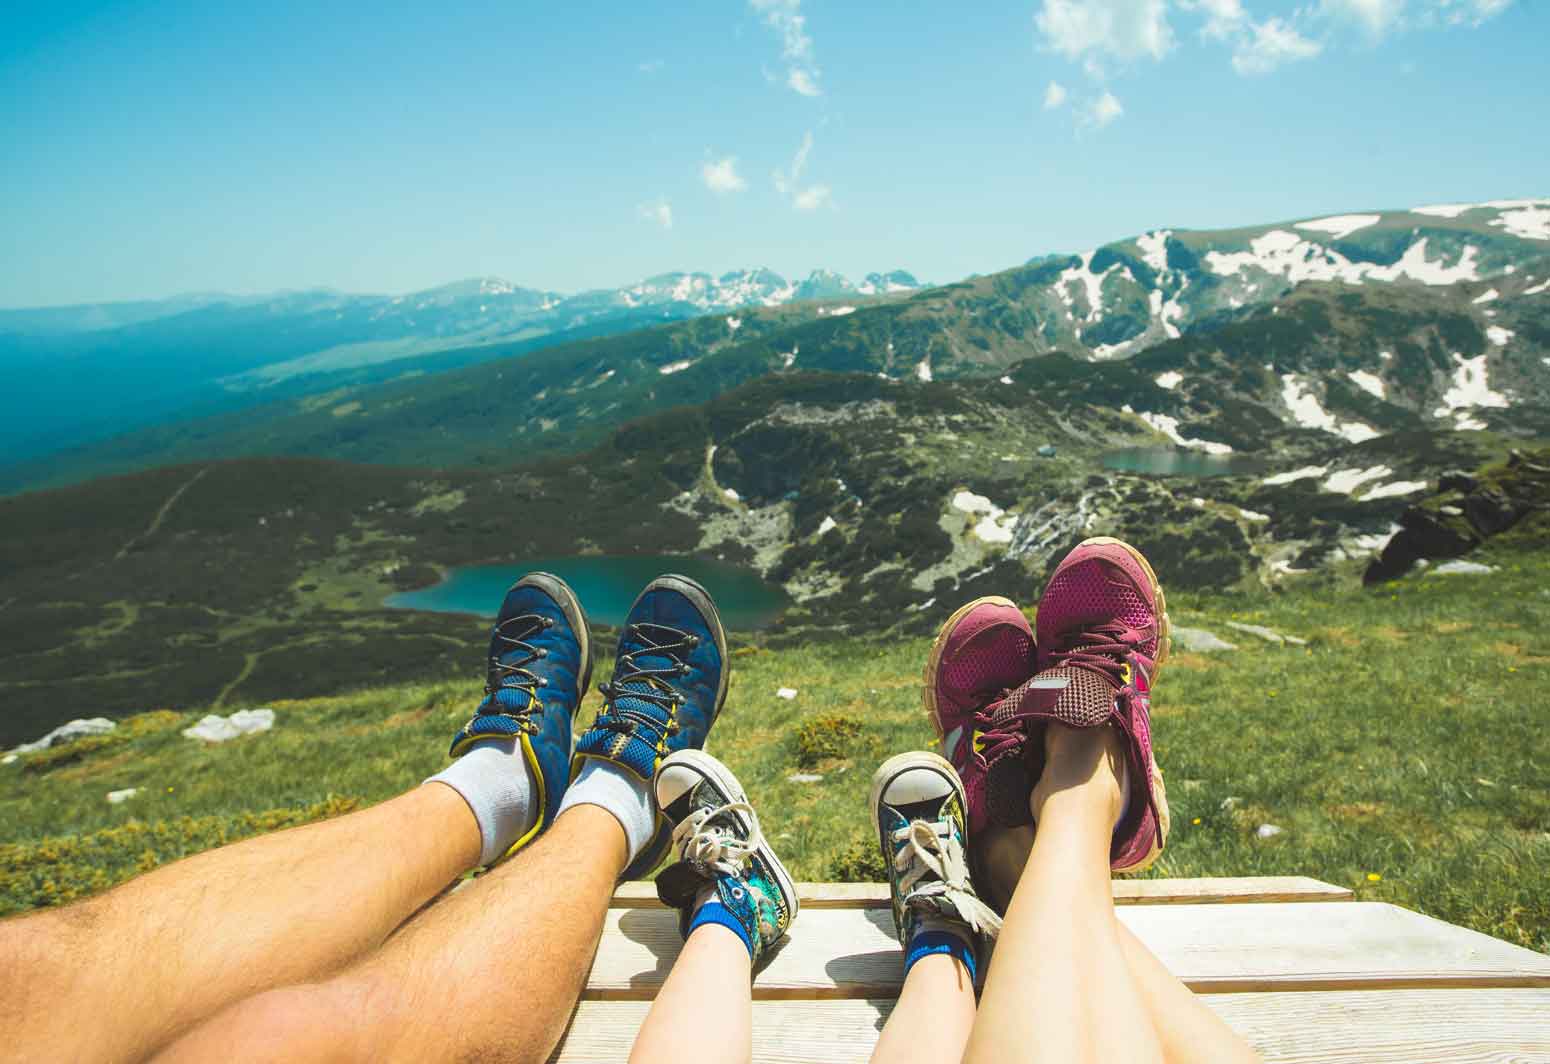 view of family's sneaker-covered legs lined up next to each other with a vast mountain landscape background while visiting travel destinations in the U.S.